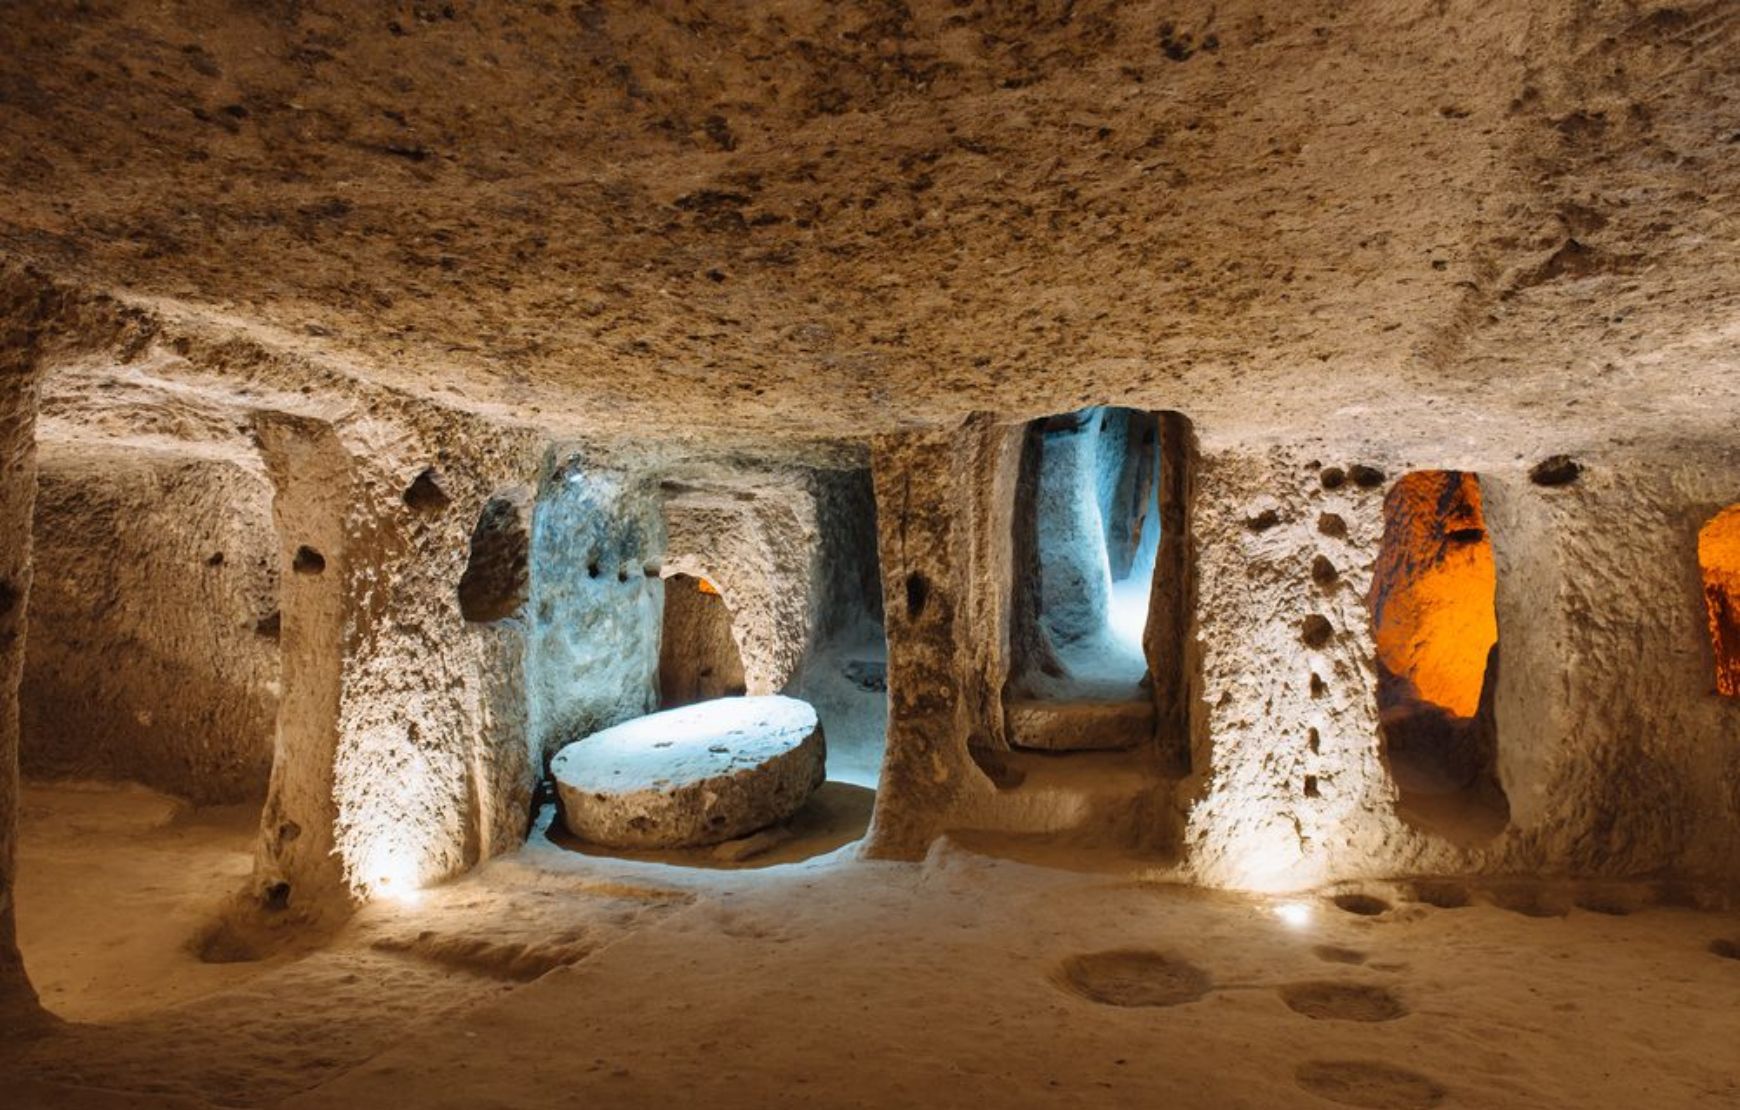 You will have chance to visit Kaymakli Underground City in our Istanbul and Cappadocia Tour